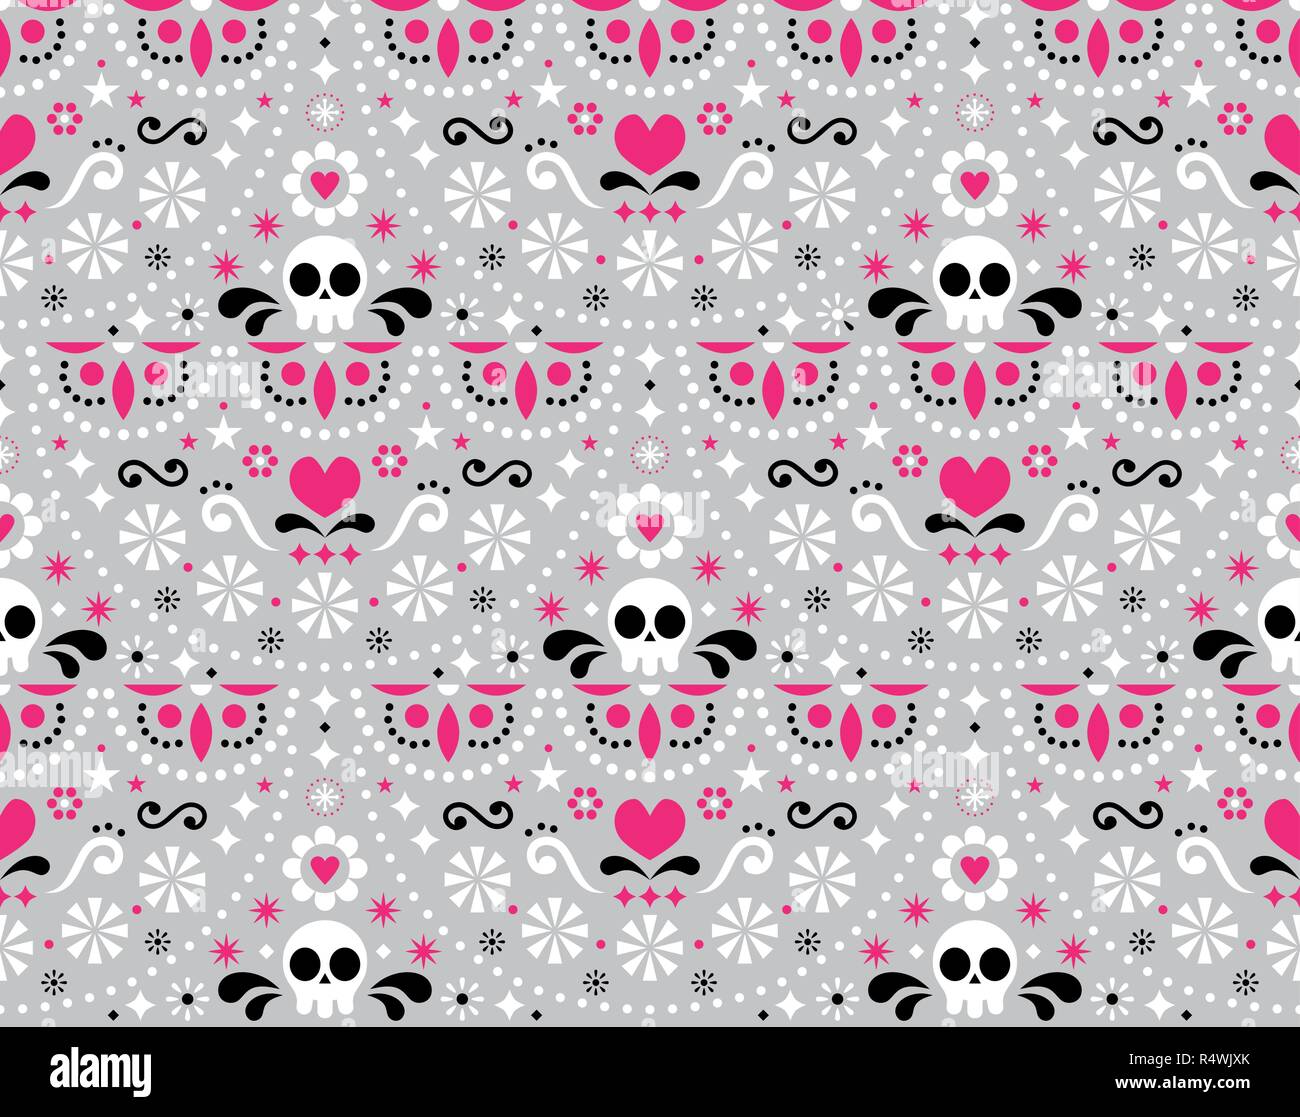 Mexican folk art vector seamless pattern with skulls, flowers and abstract shapes, pink, white and gray textile design inspired by traditional art for Stock Vector